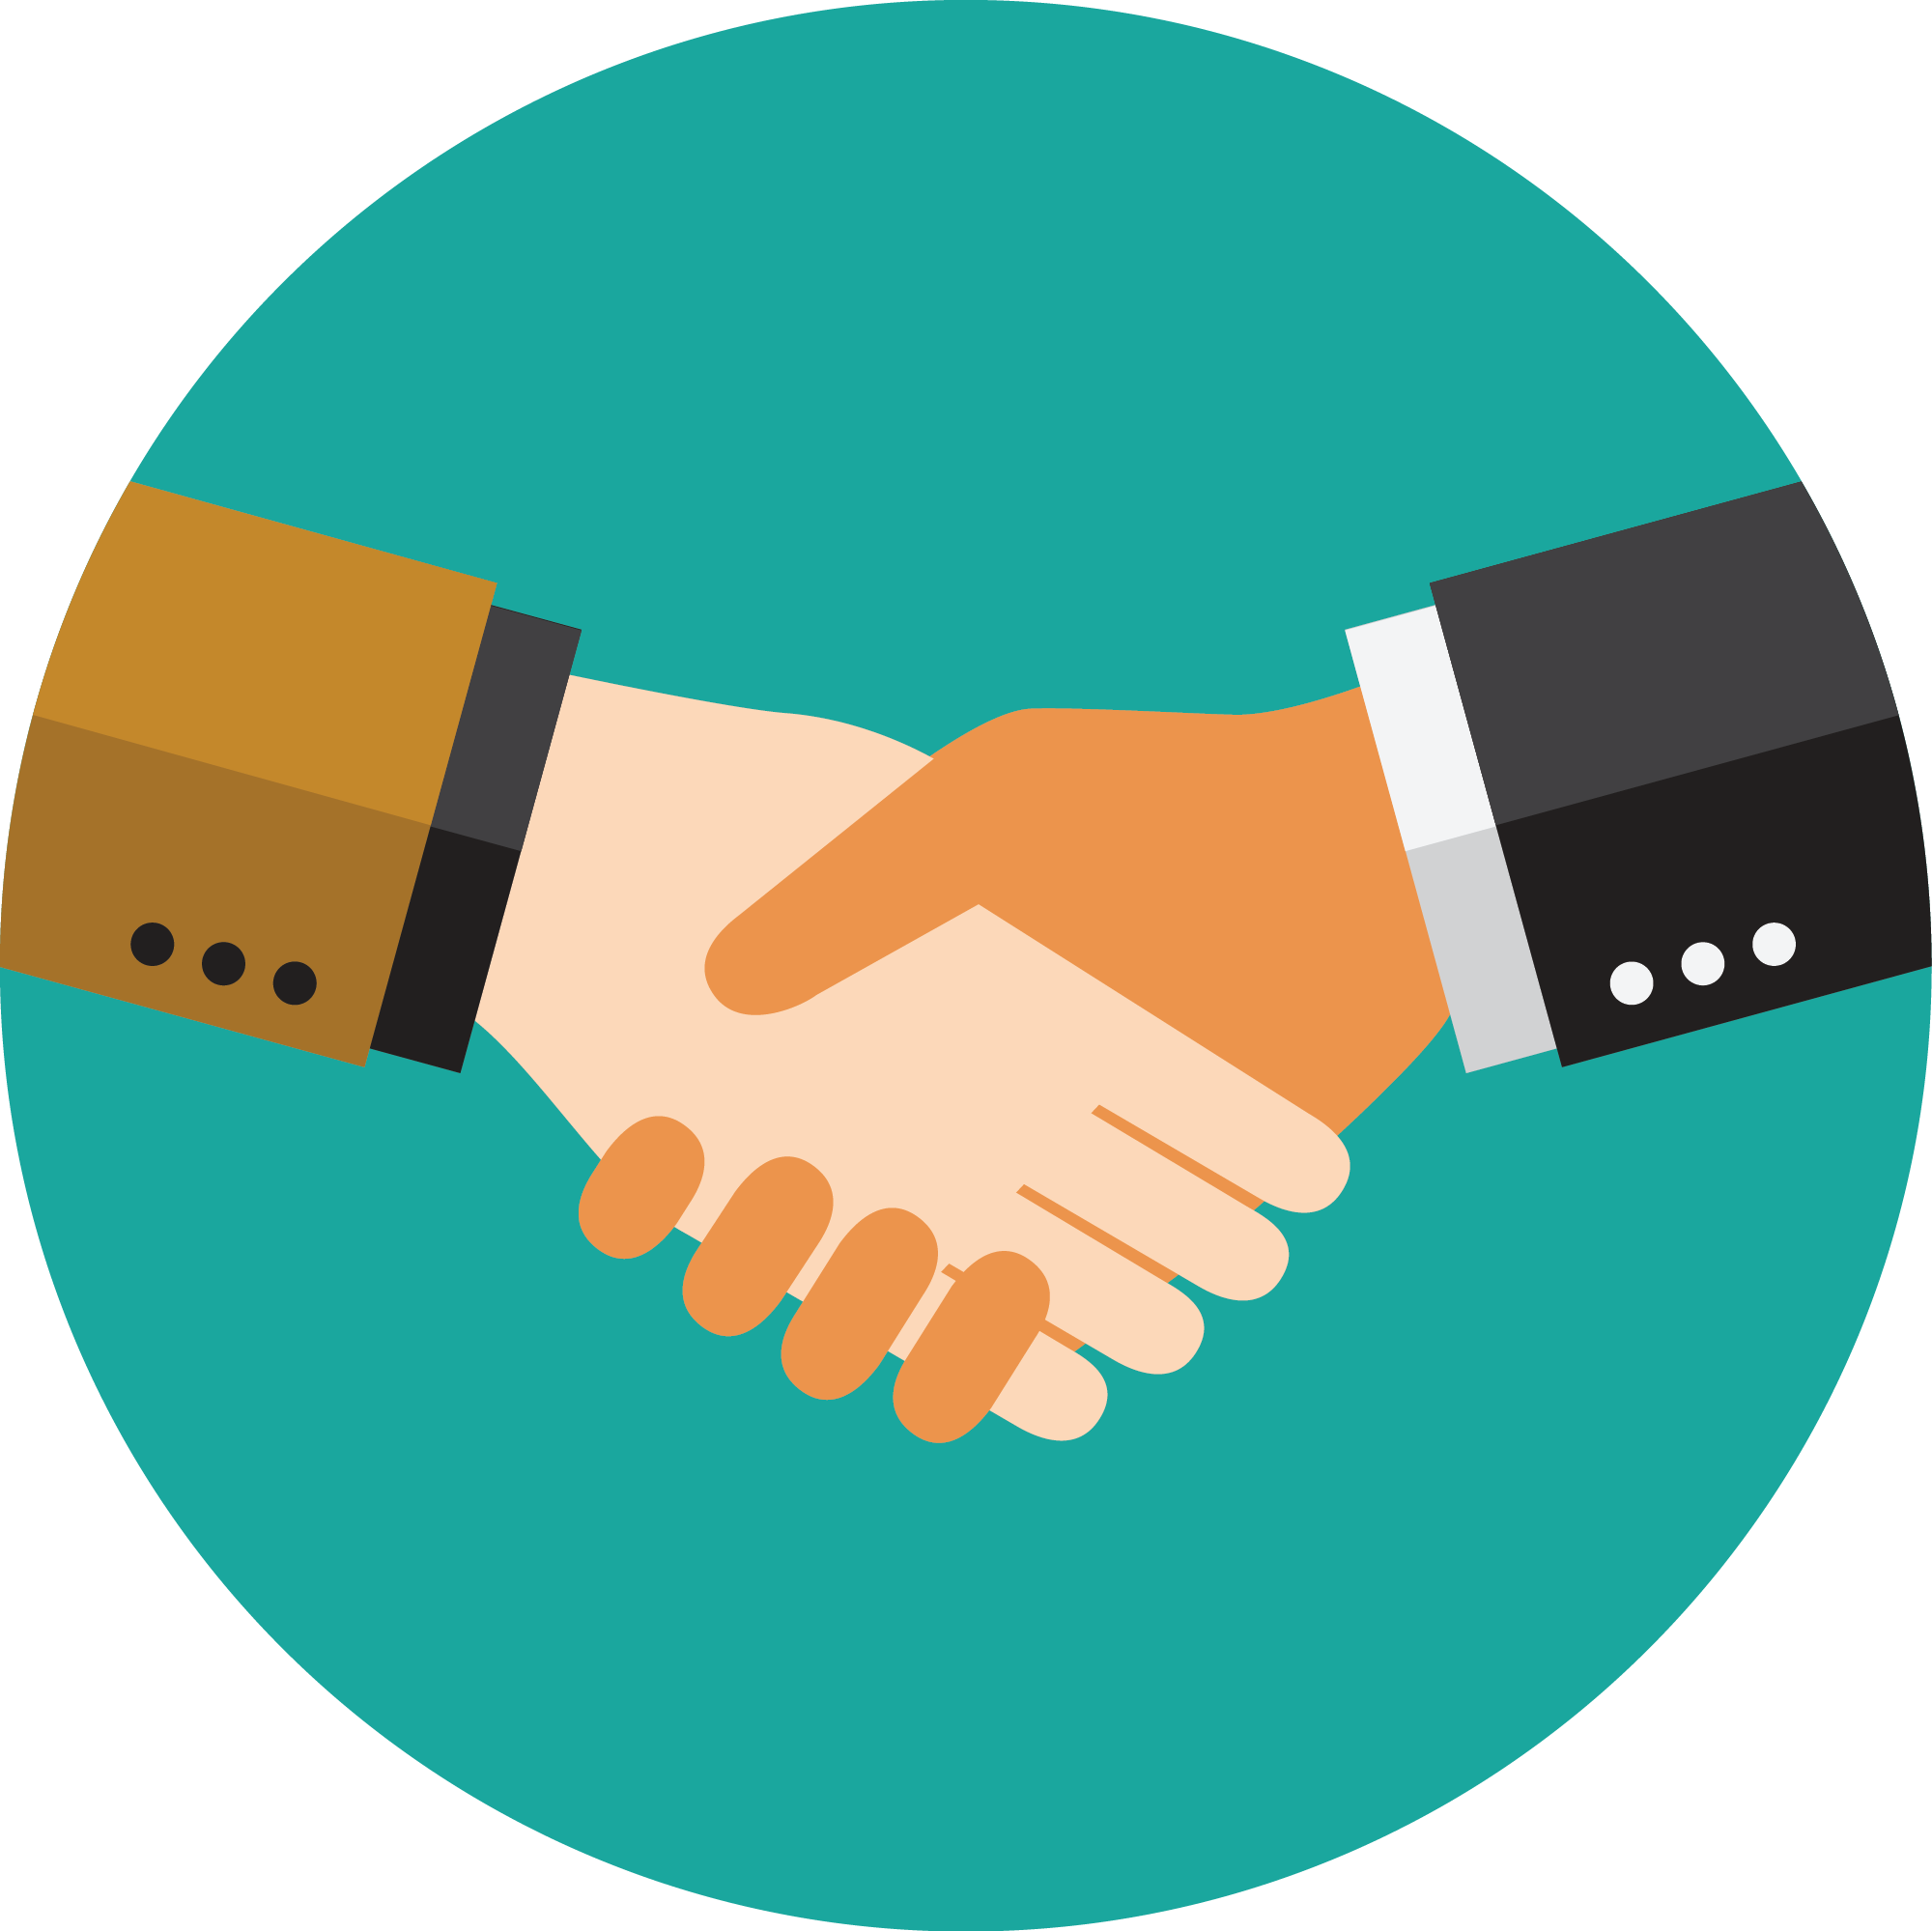 Uco purchasing policies and. Handshake clipart partnership